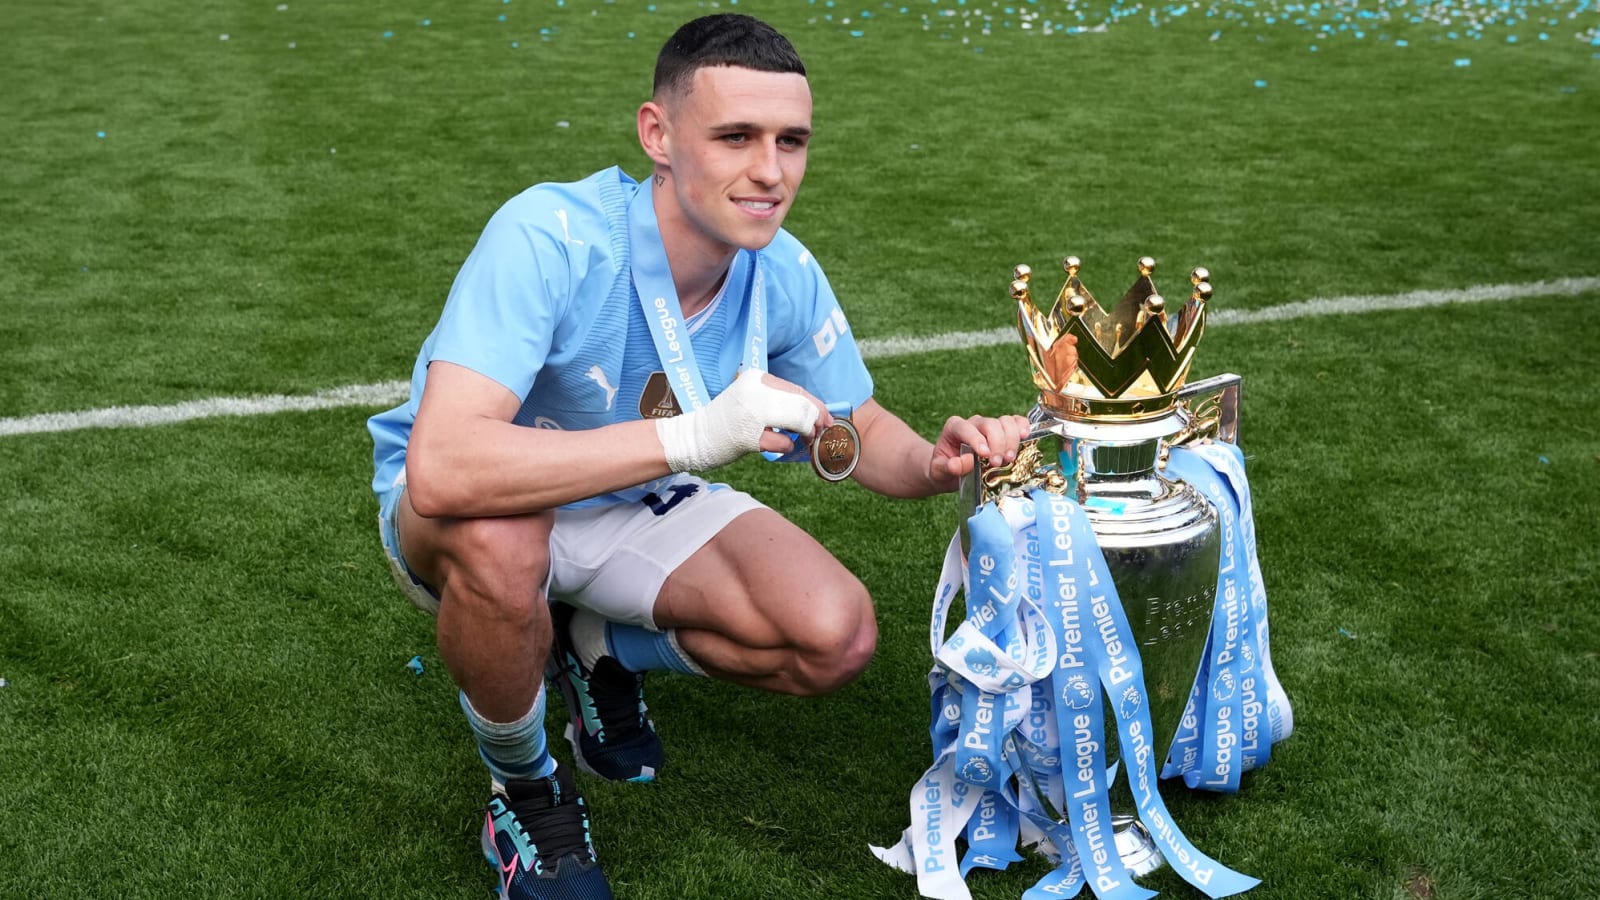 City’s boy wonder seized the moment to cap off his incredible season